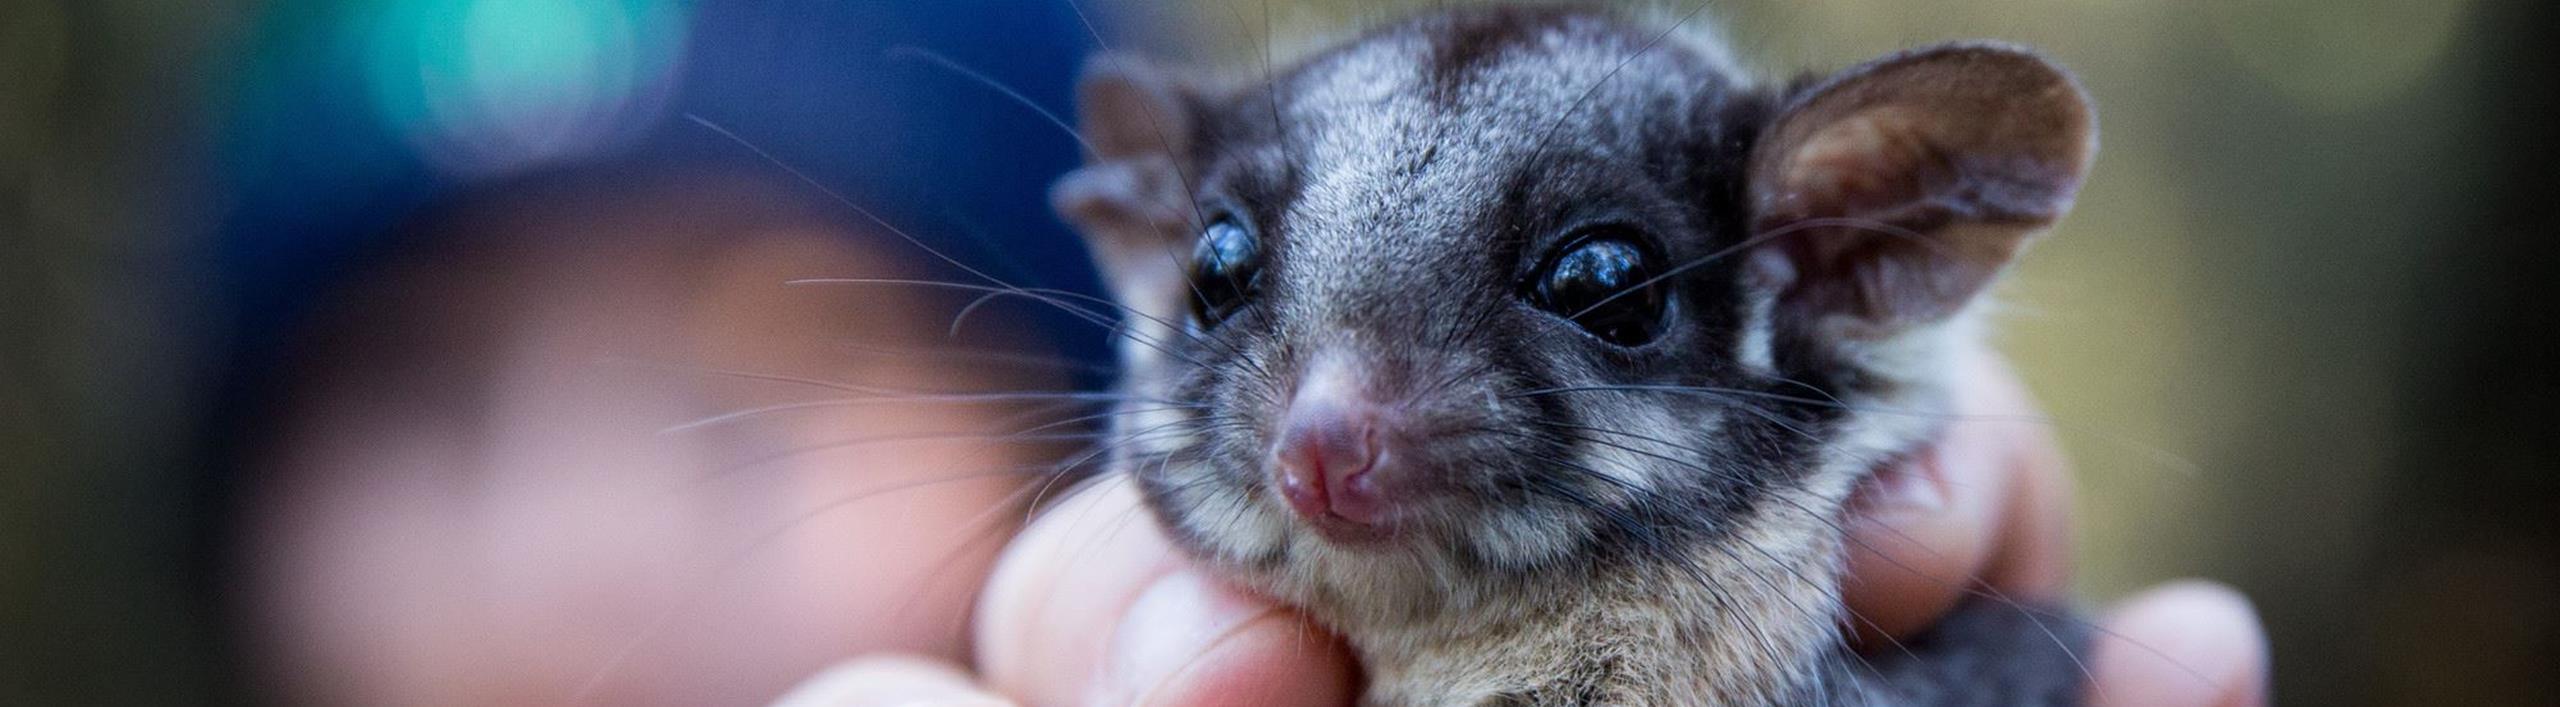 Leadbeater's Possum being held up to the camera.